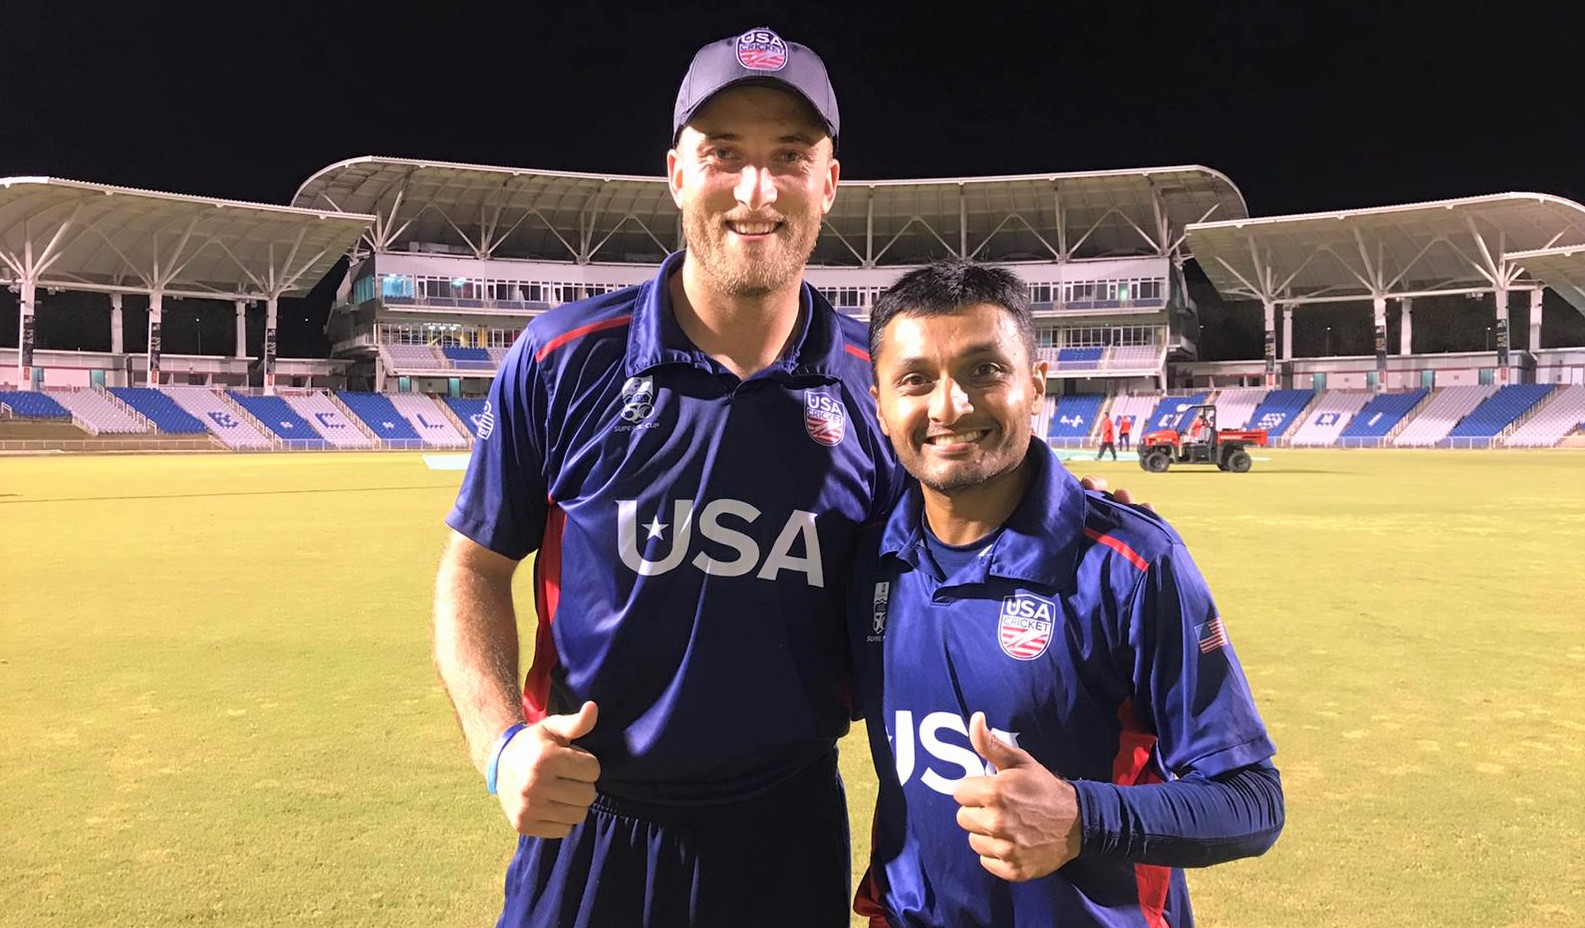 All round USA rally to take first Super50 win in Trinidad